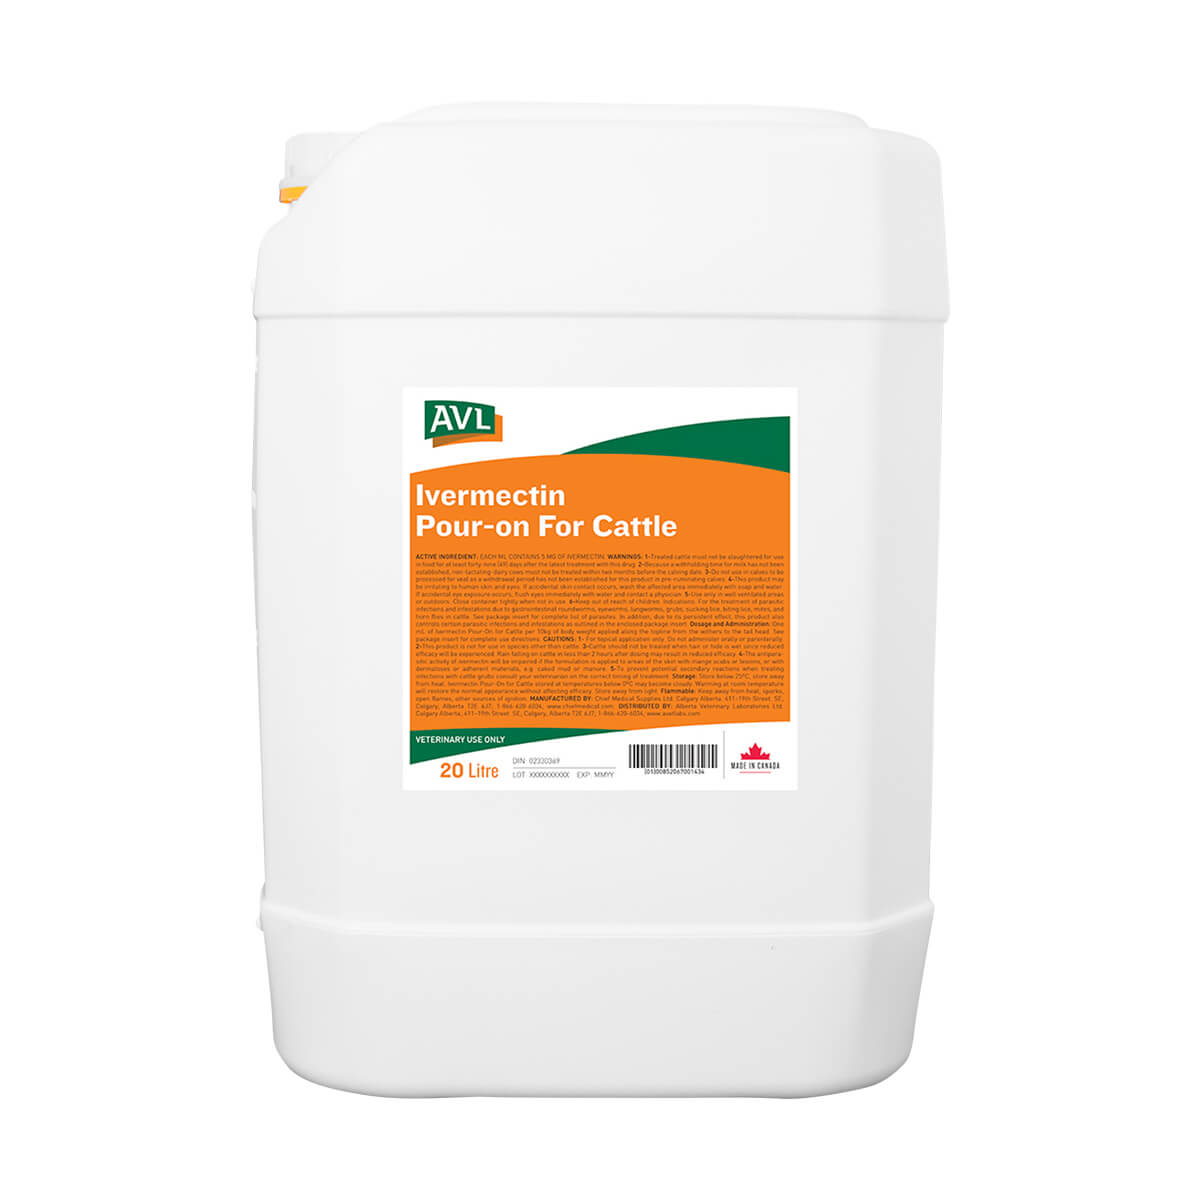 AVL Ivermectin Pour-on For Cattle - 20 L